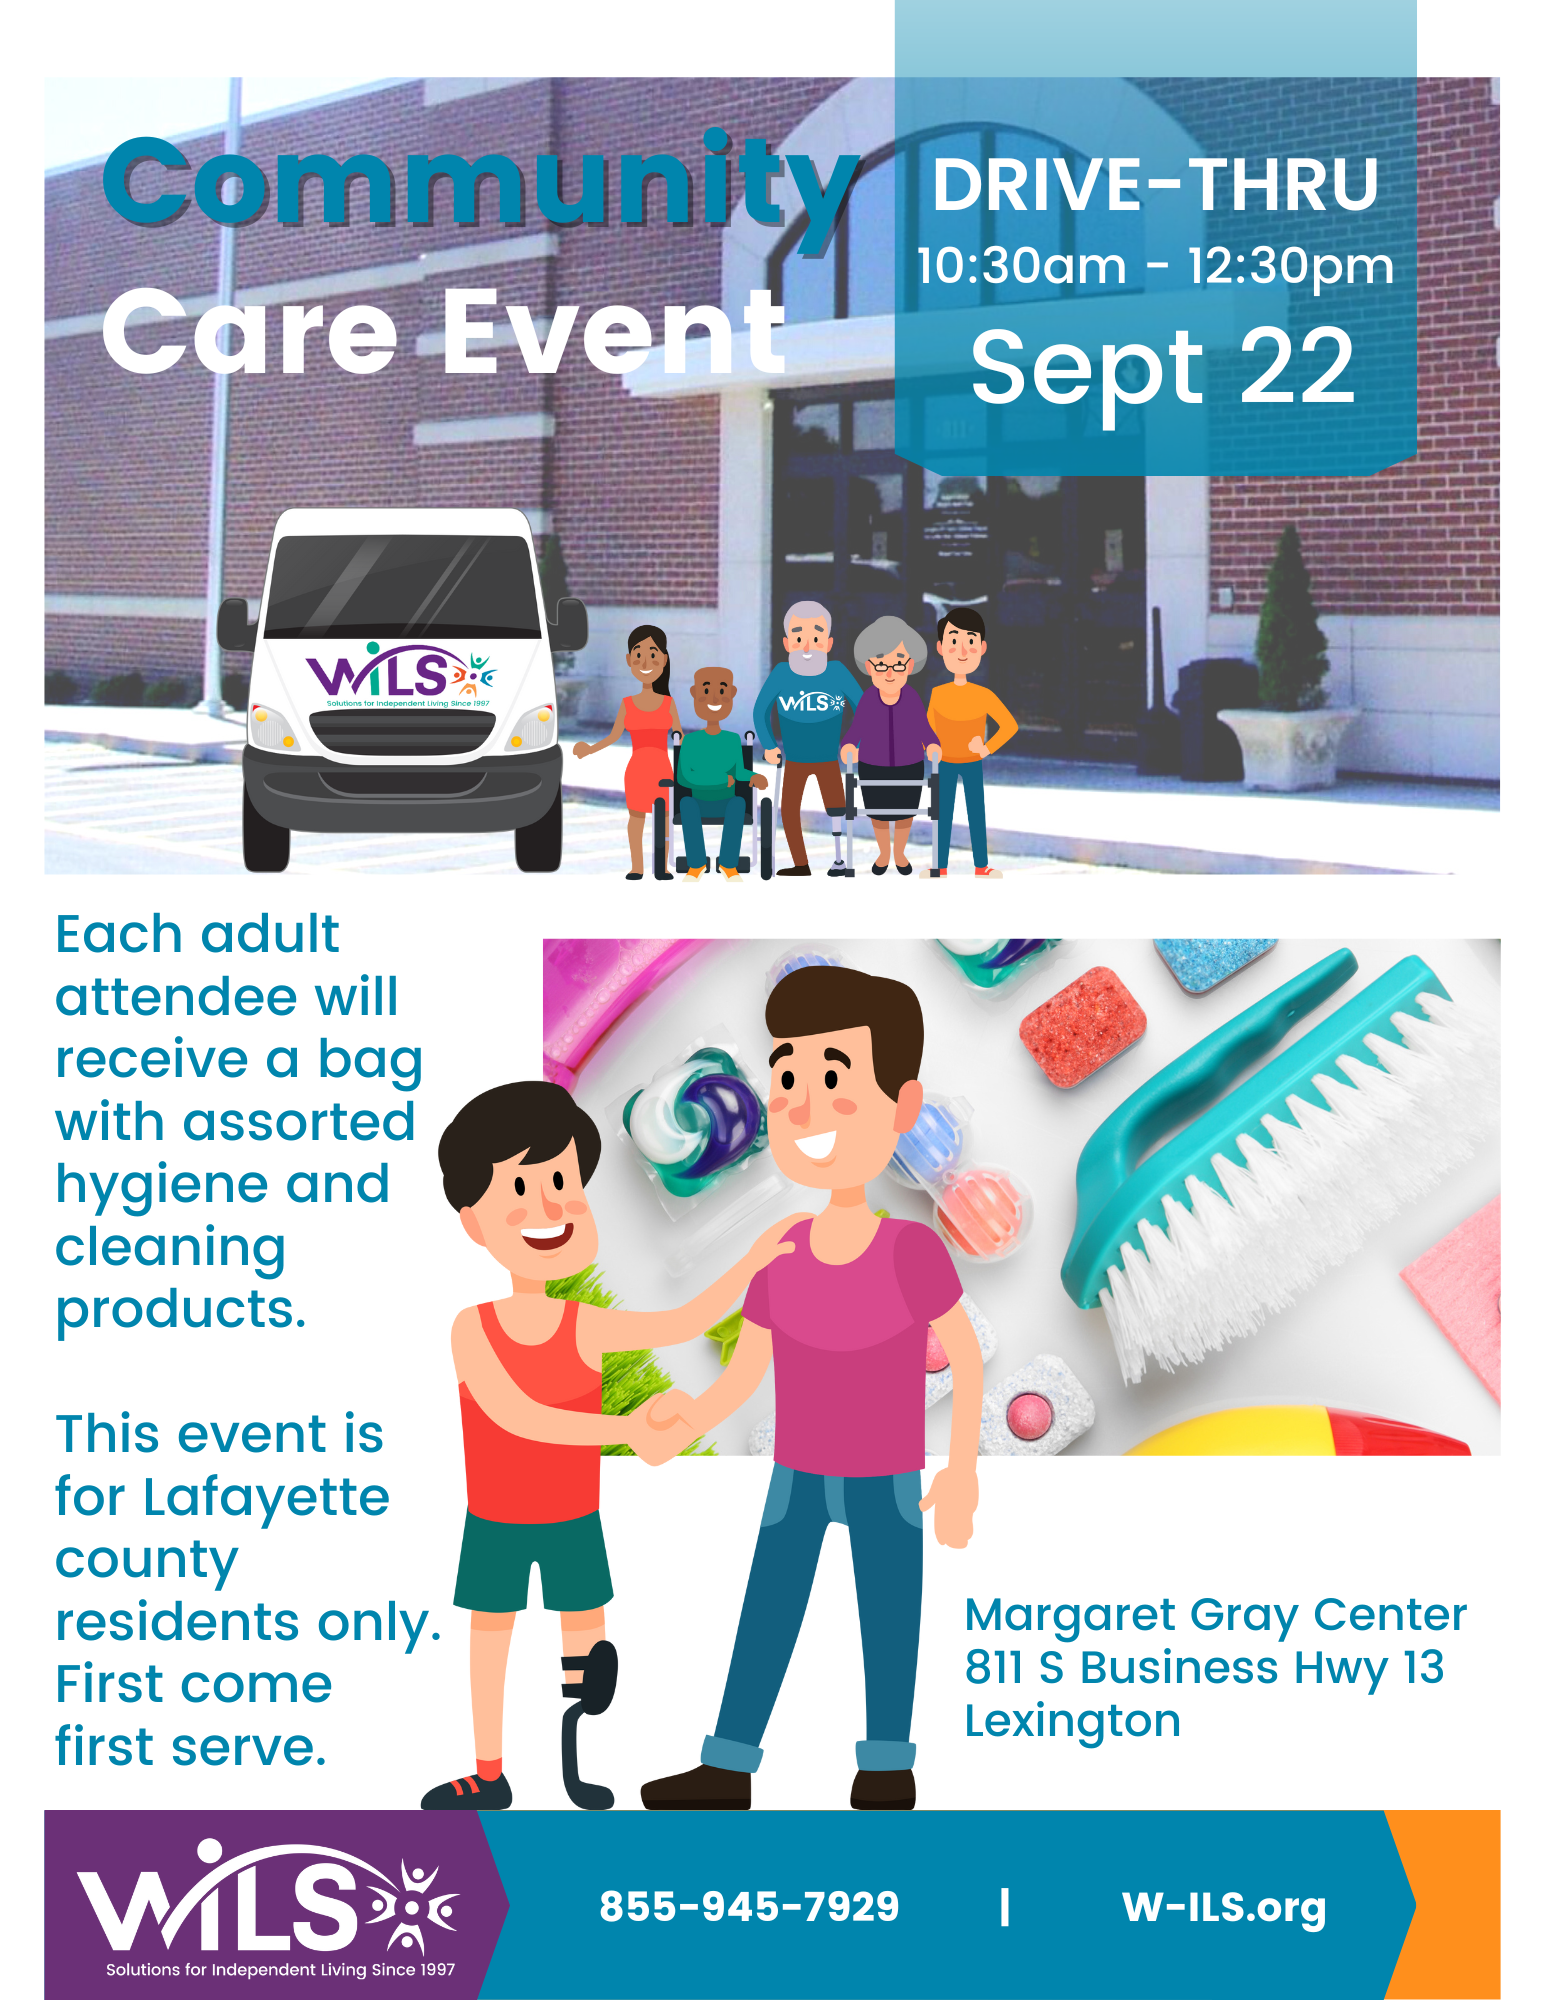 WILS is hosting a Community Care drive-thru event in Lexington.  Each adult attendee will receive a FREE bag with assorted cleaning products and hygiene items.  This event is for Lafayette county residents only. First come first serve. Sept 22, 10:30am - 12:30pm